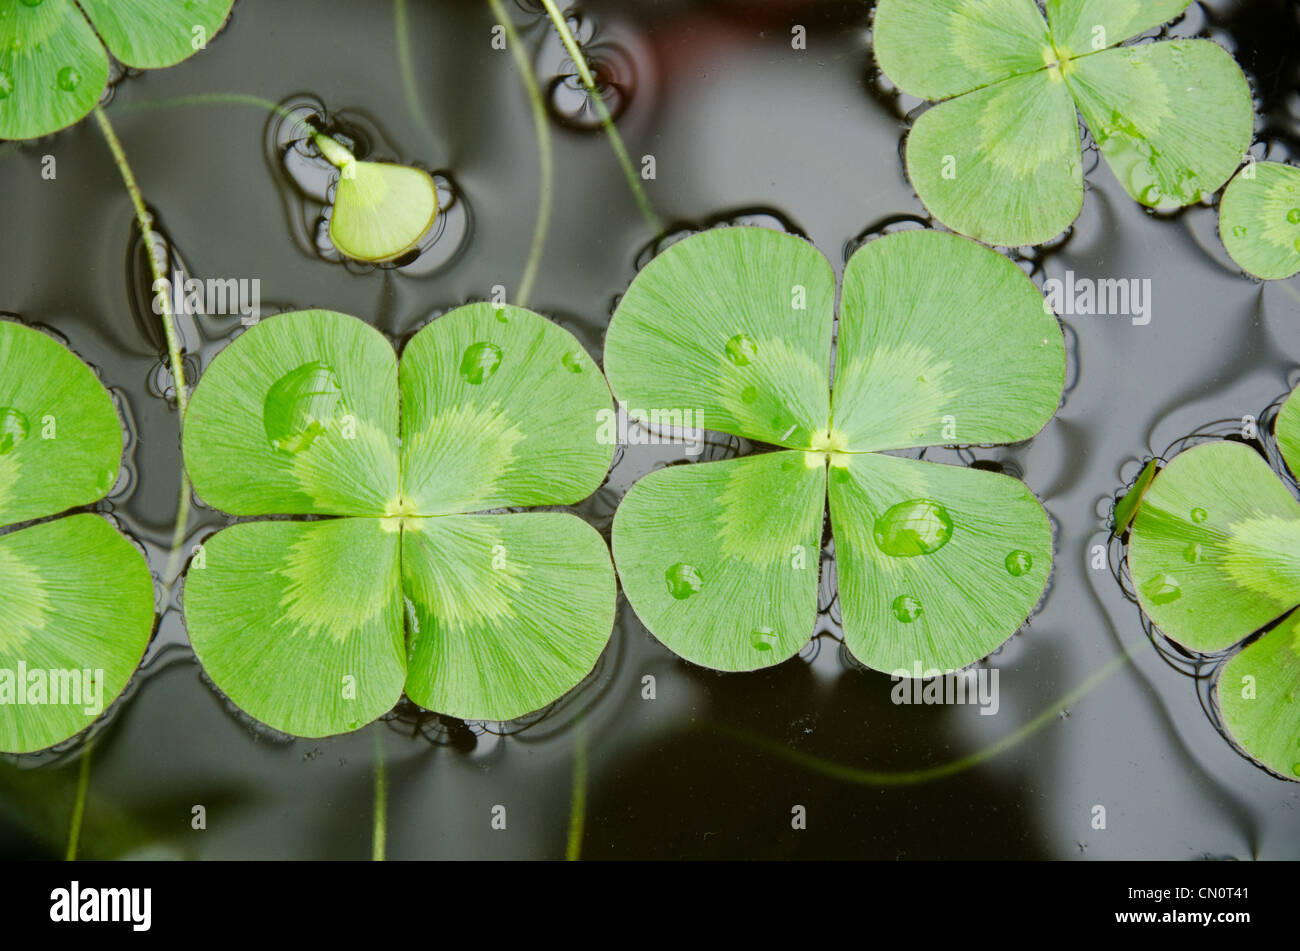 Water clover, Marsilea mutica, with four clover like leaves on water surface Stock Photo